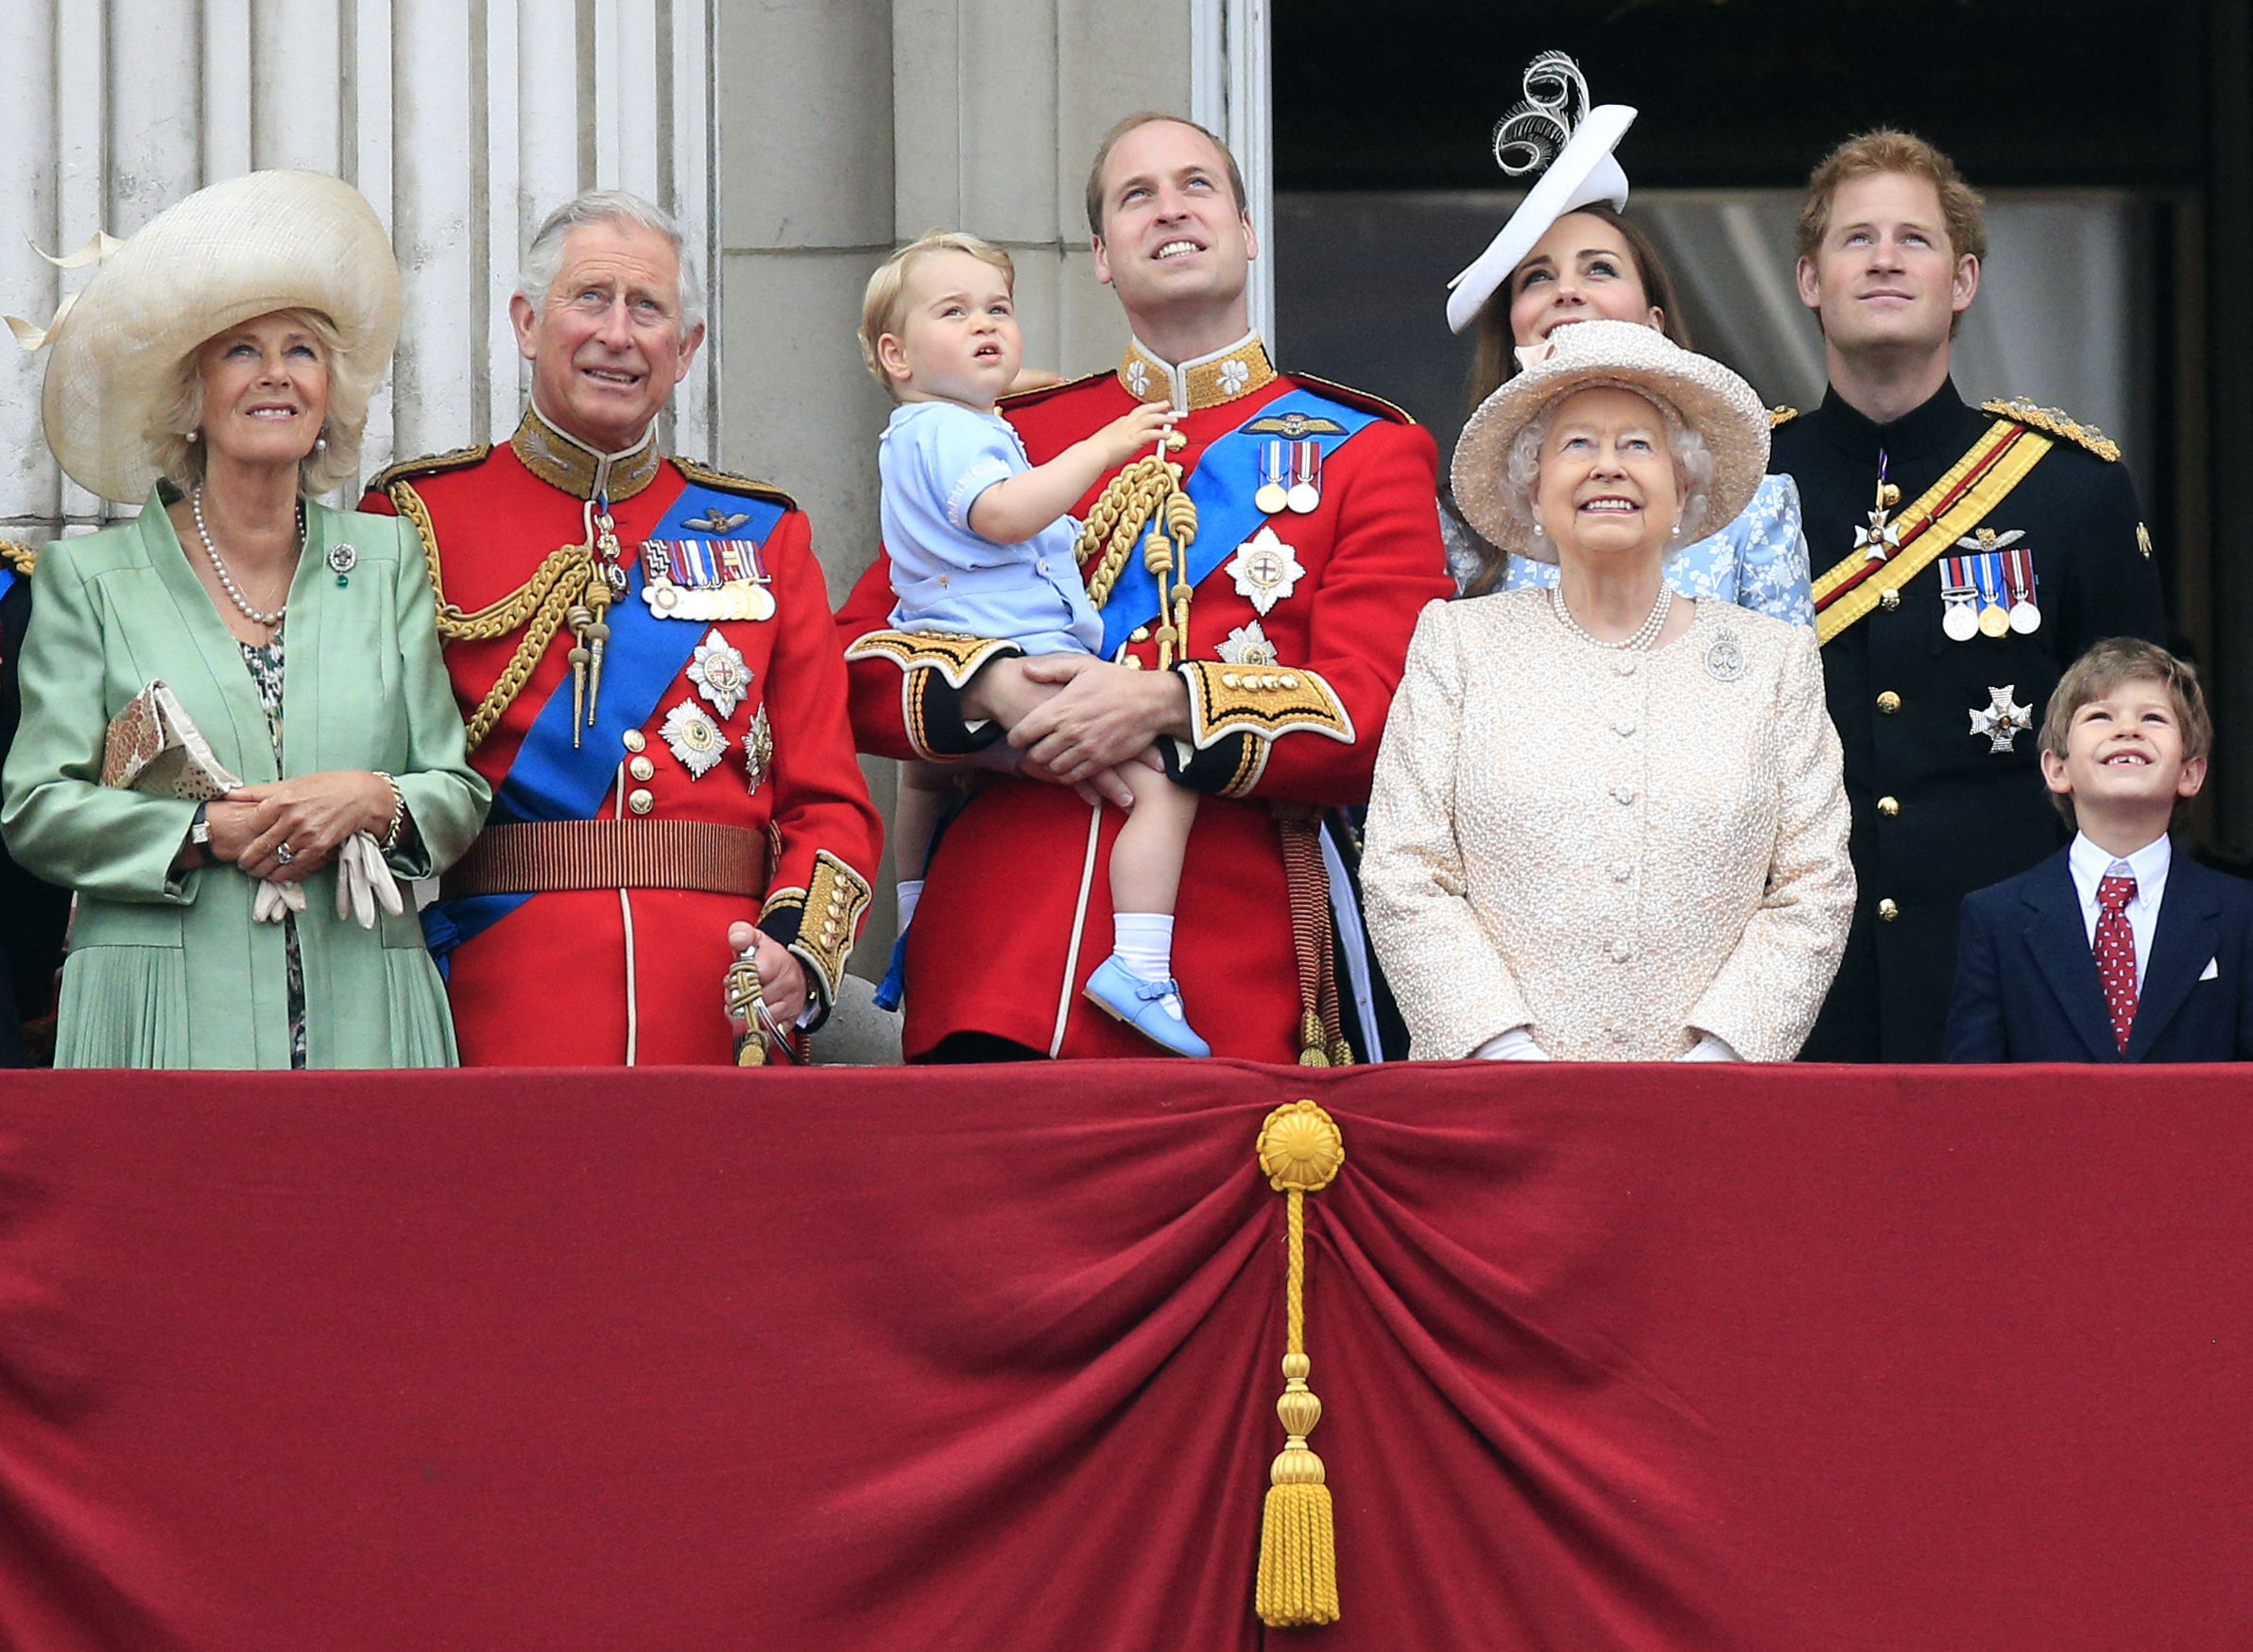 File photo dated 13/6/2015 of the Duchess of Cornwall, the Prince of Wales, Prince George, the Duke and Duchess of Cambridge, Queen Elizabeth II, Prince Harry, James Viscount Severn on the balcony at Buckingham Palace following Trooping the Colour at Horse Guards Parade, London.